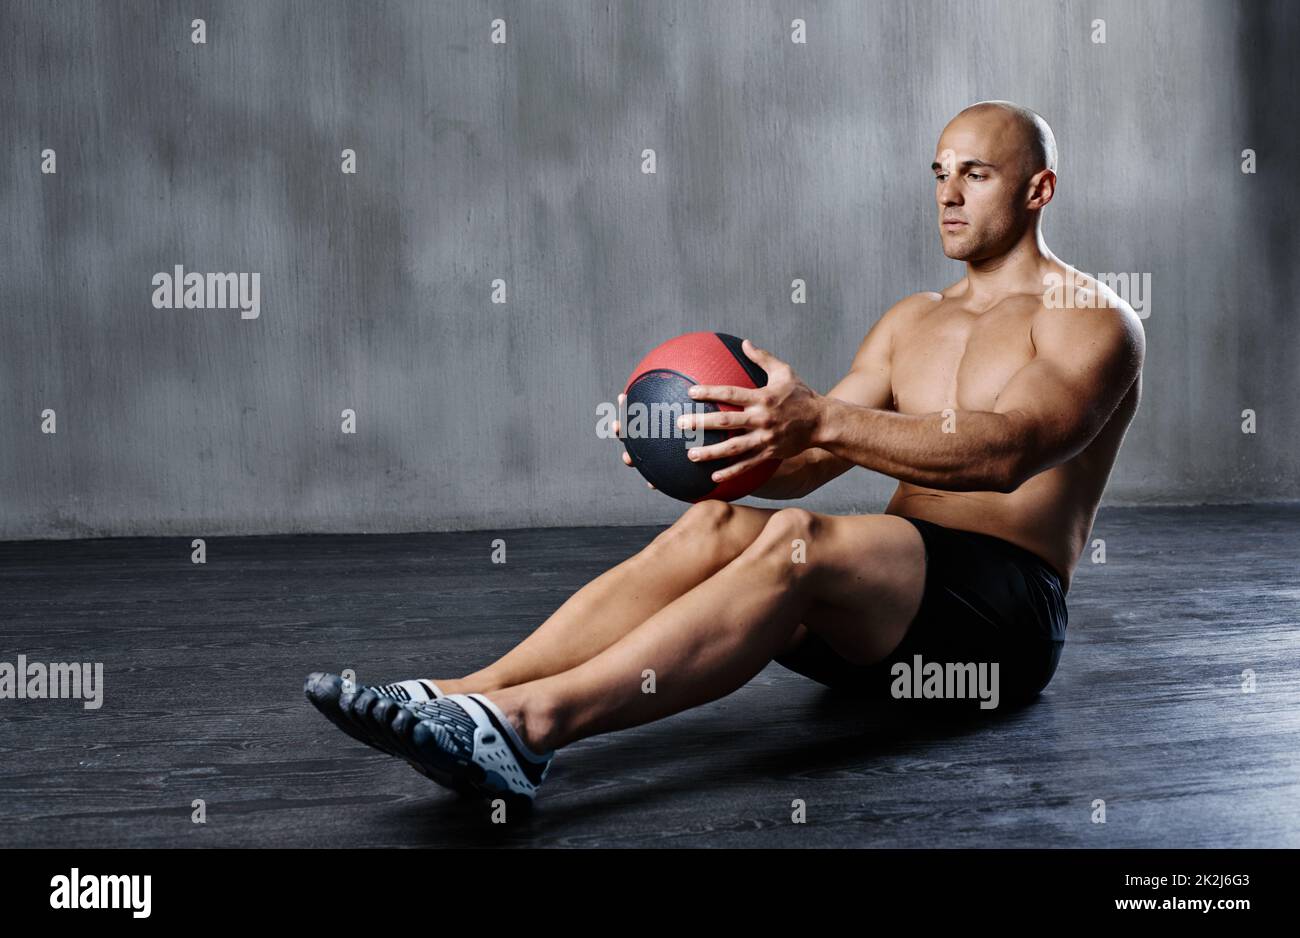 Stepping up his fitness routine. Shot of a man doing exercises with a medicine ball at the gym. Stock Photo